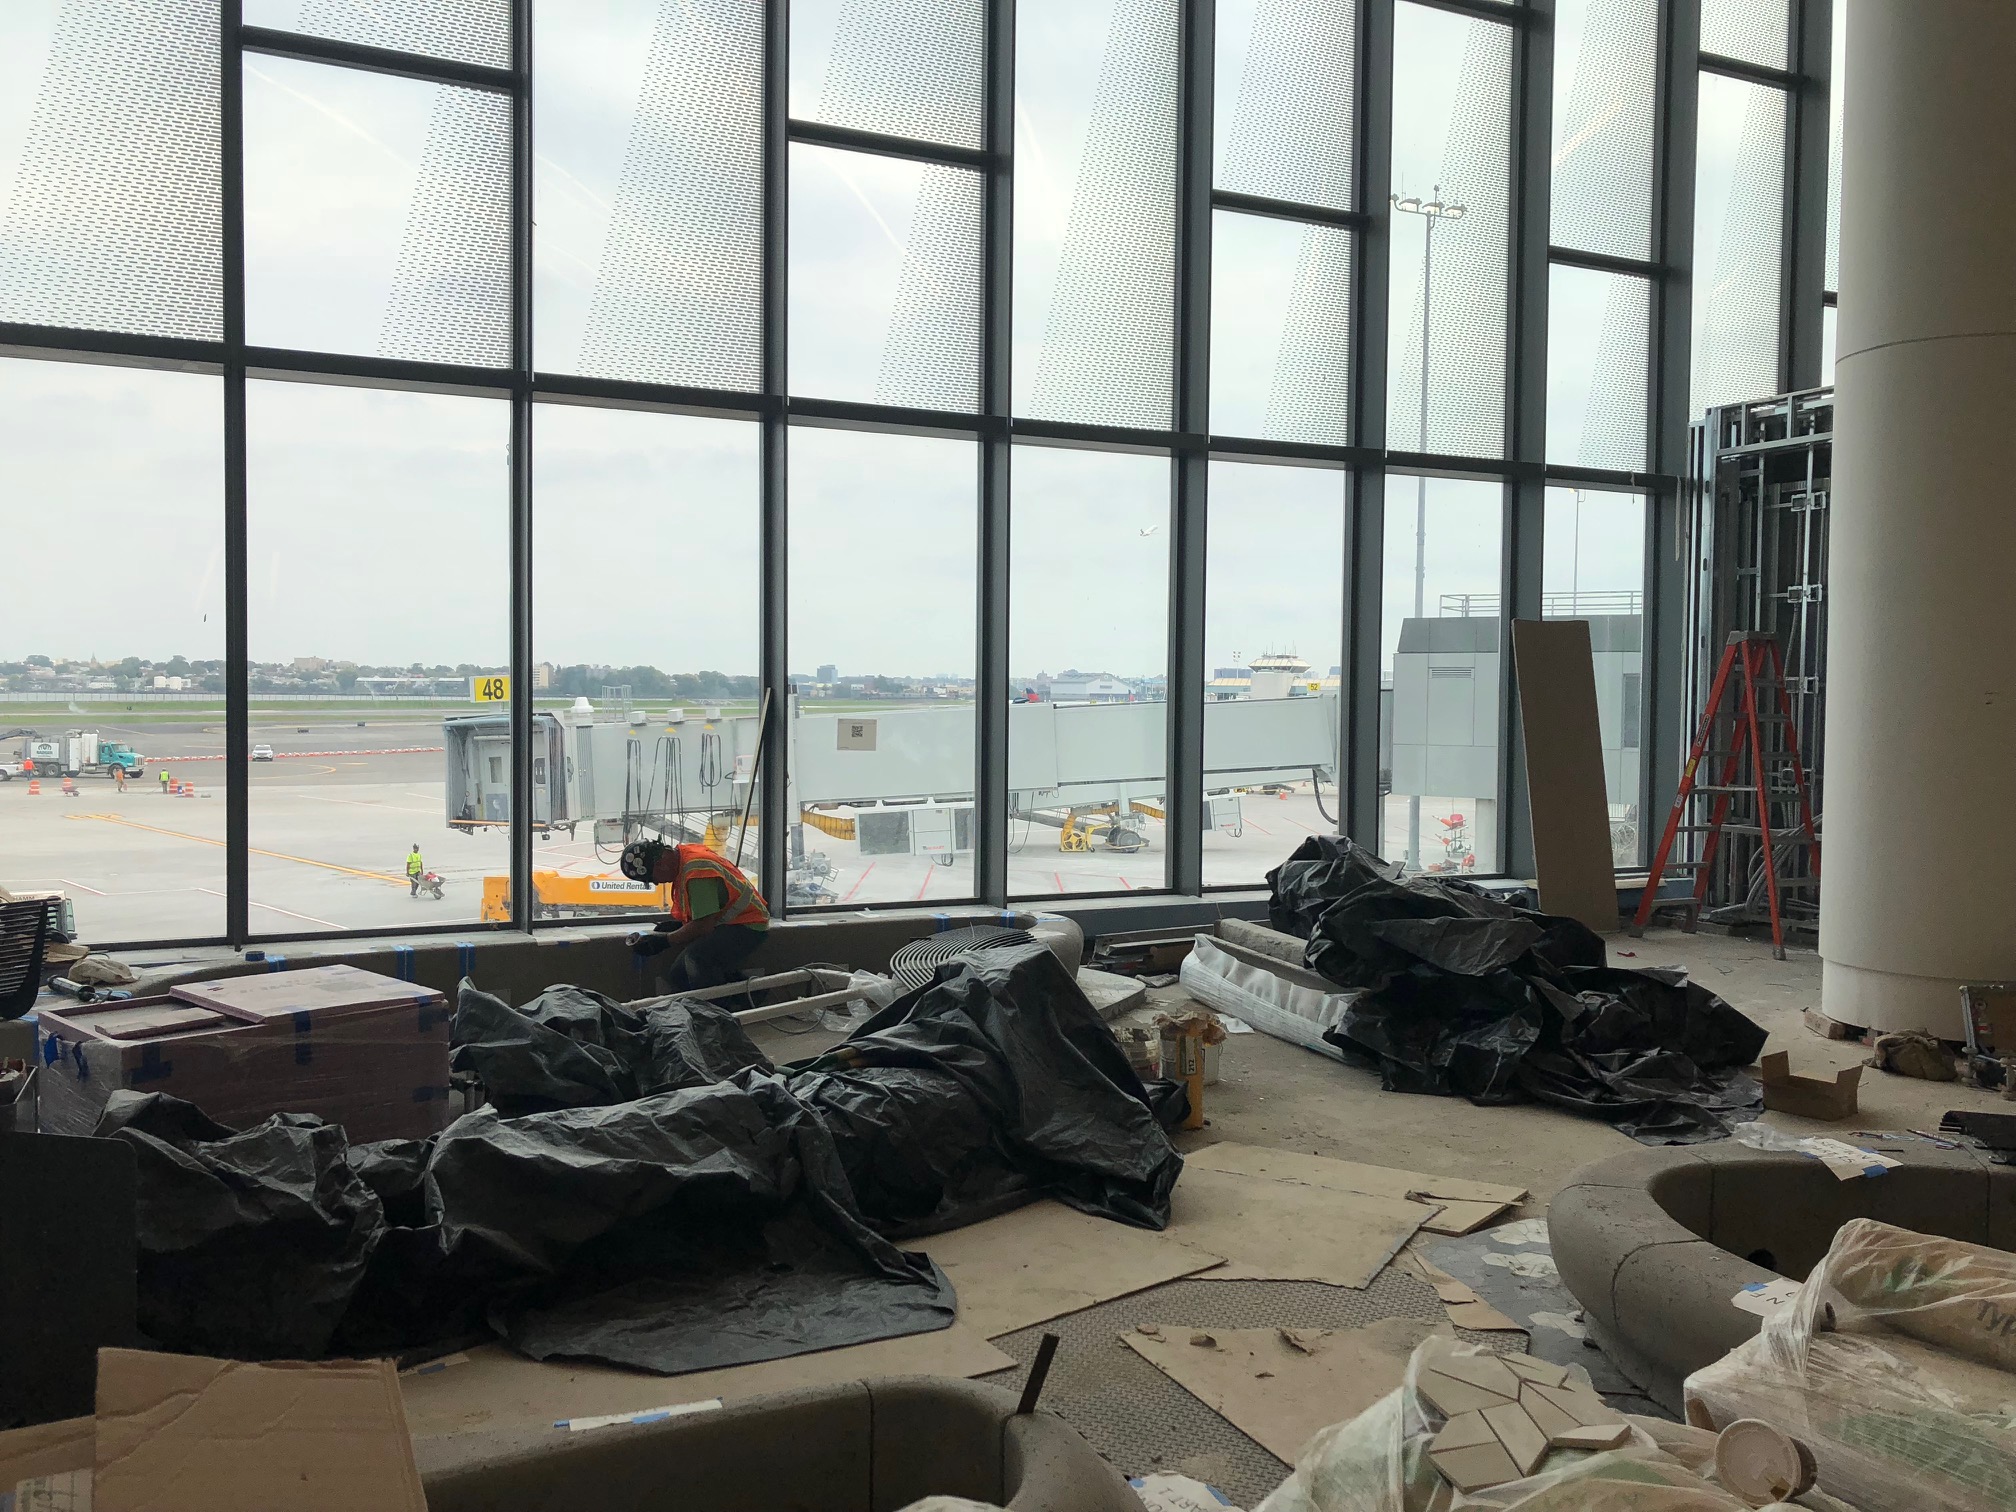 Indoor Acoustical Flooring Installed at NYC Airport a